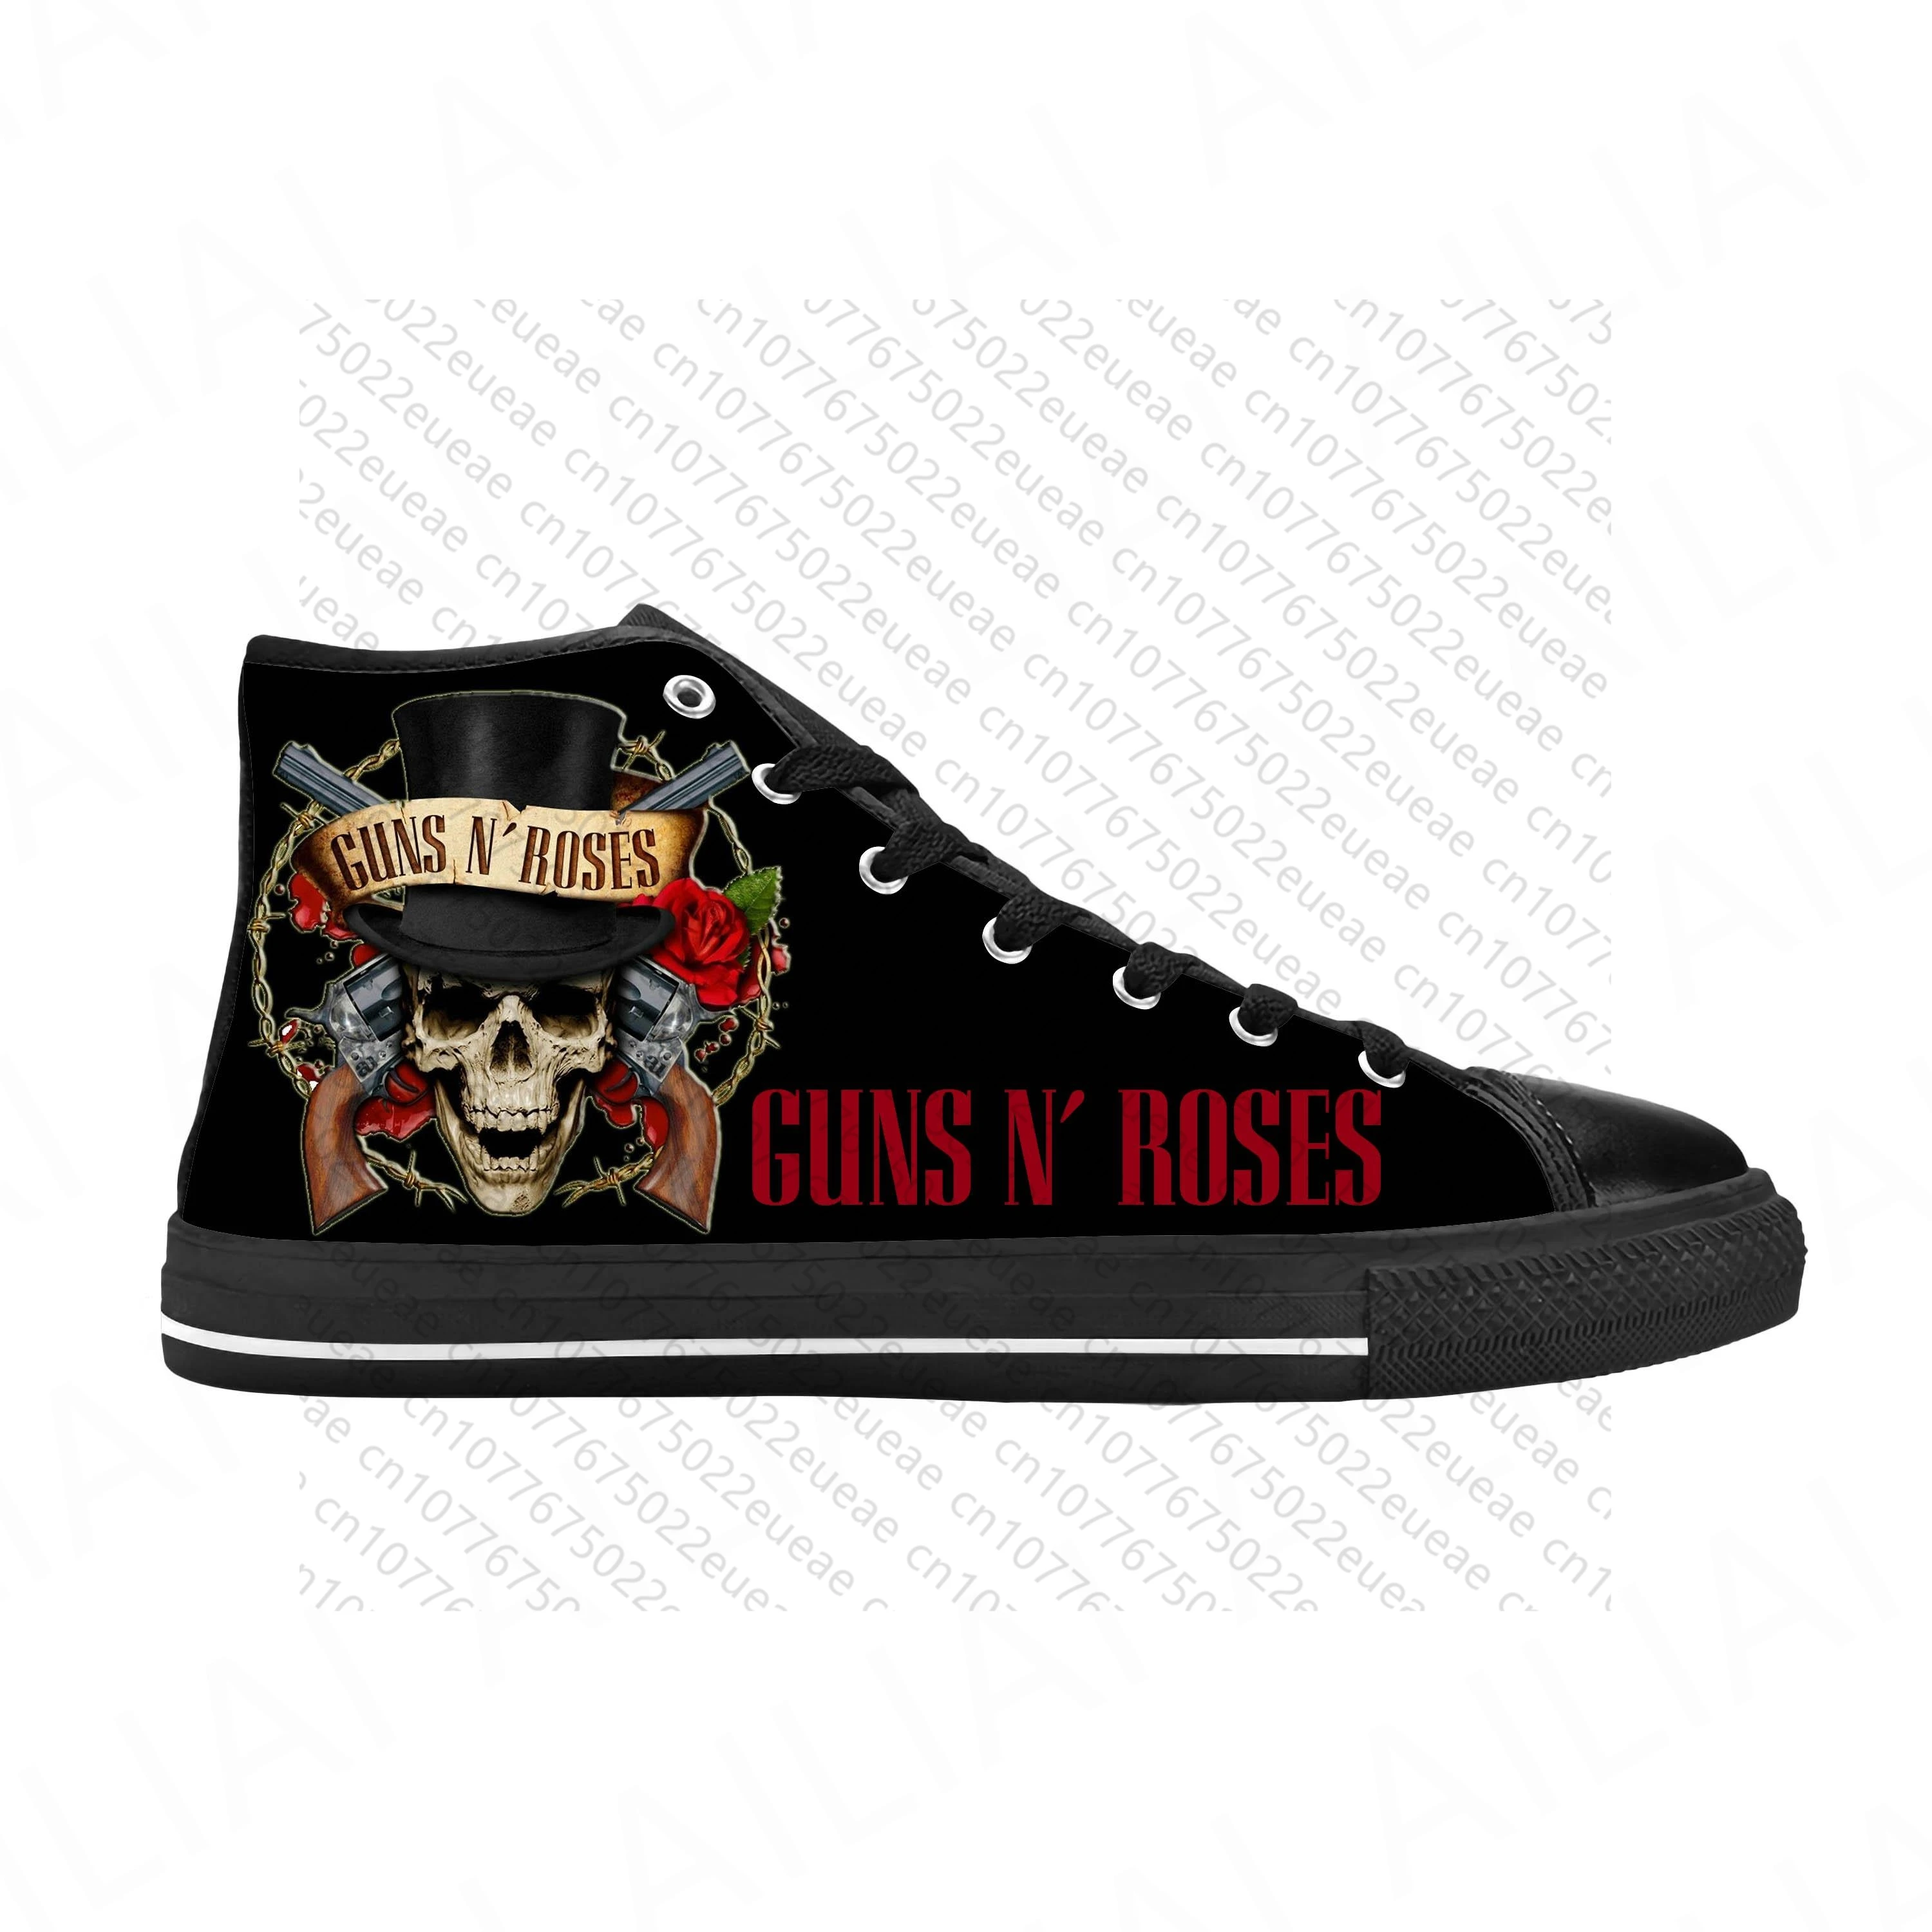 

Hot Guns N Roses Rose Heavy Metal Rock Band Music Casual Cloth Shoes High Top Comfortable Breathable 3D Print Men Women Sneakers